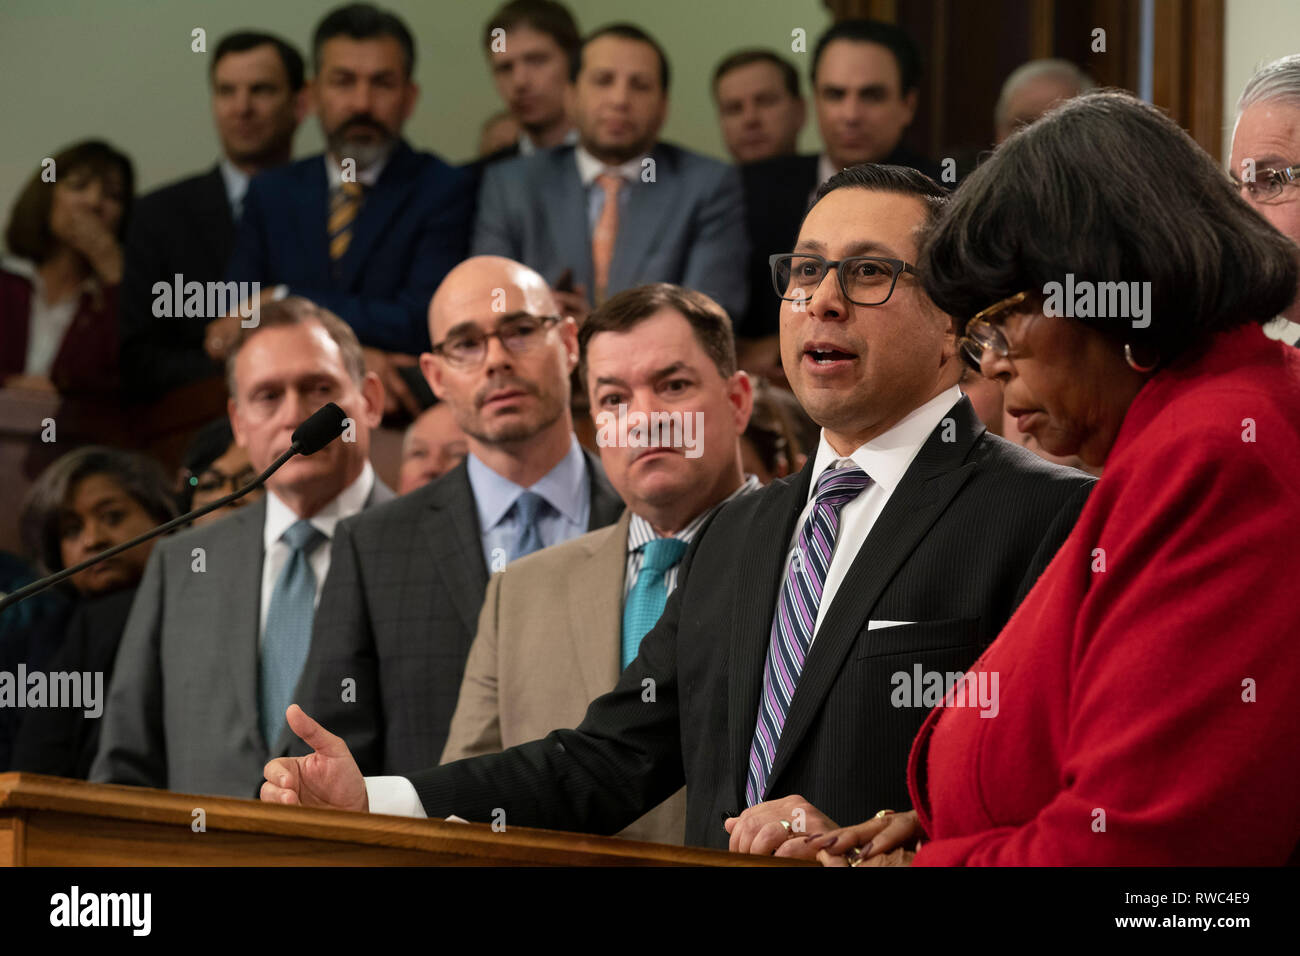 Texas state Rep. Diego Bernal, D-San Antonio, vice-chair of the House Public Education Committee, speaks at a press conference about the House's school finance bill while surrounded by dozens of House members in the Texas Capitol in Austin. Stock Photo